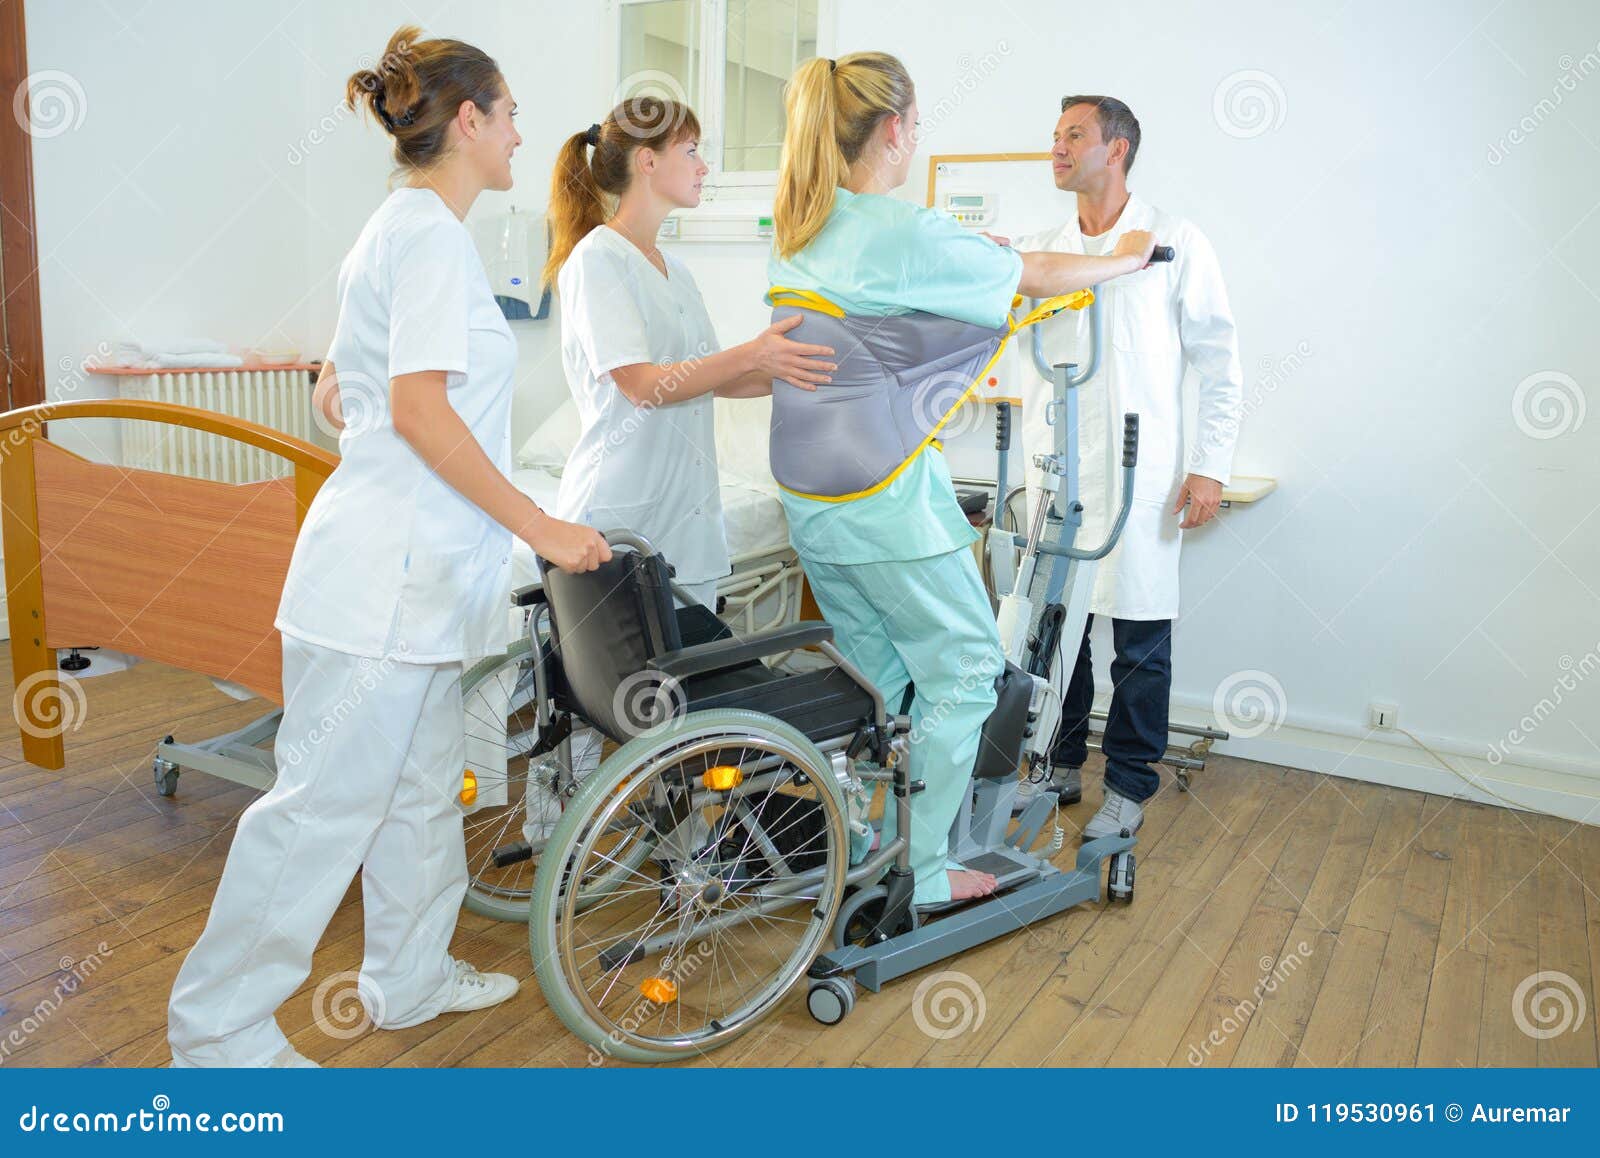 medical staff helping woman to standing